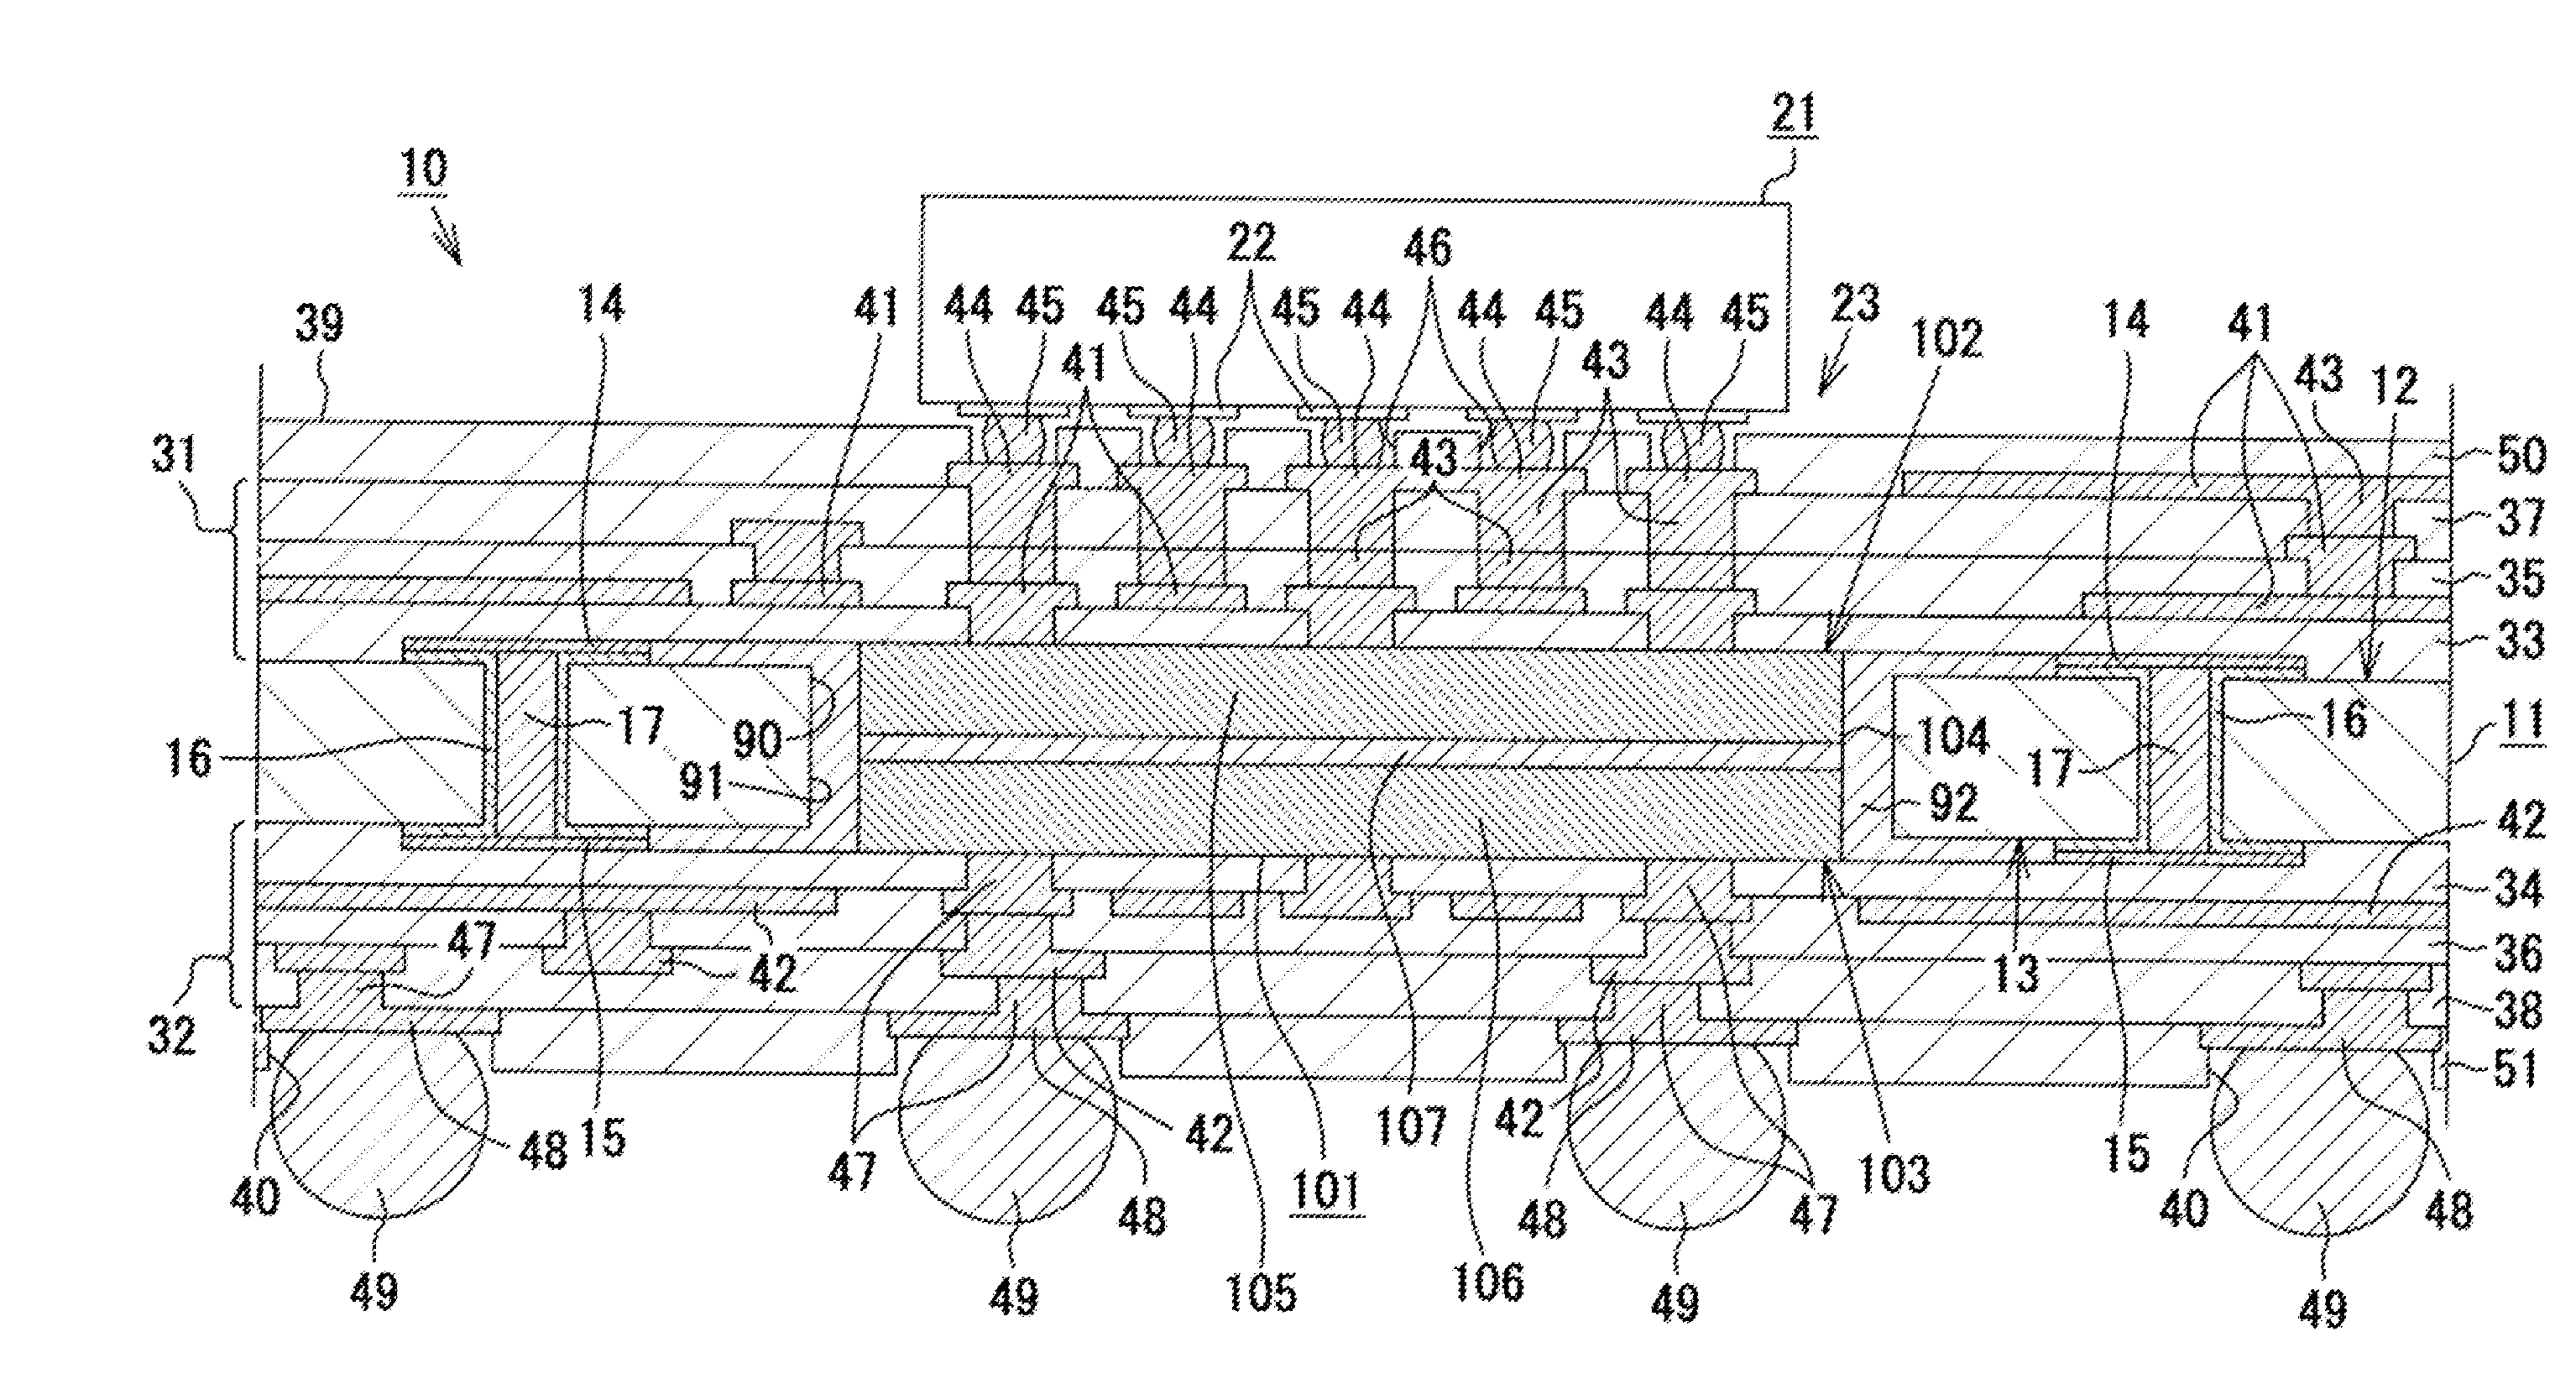 Multilayered wiring substrate